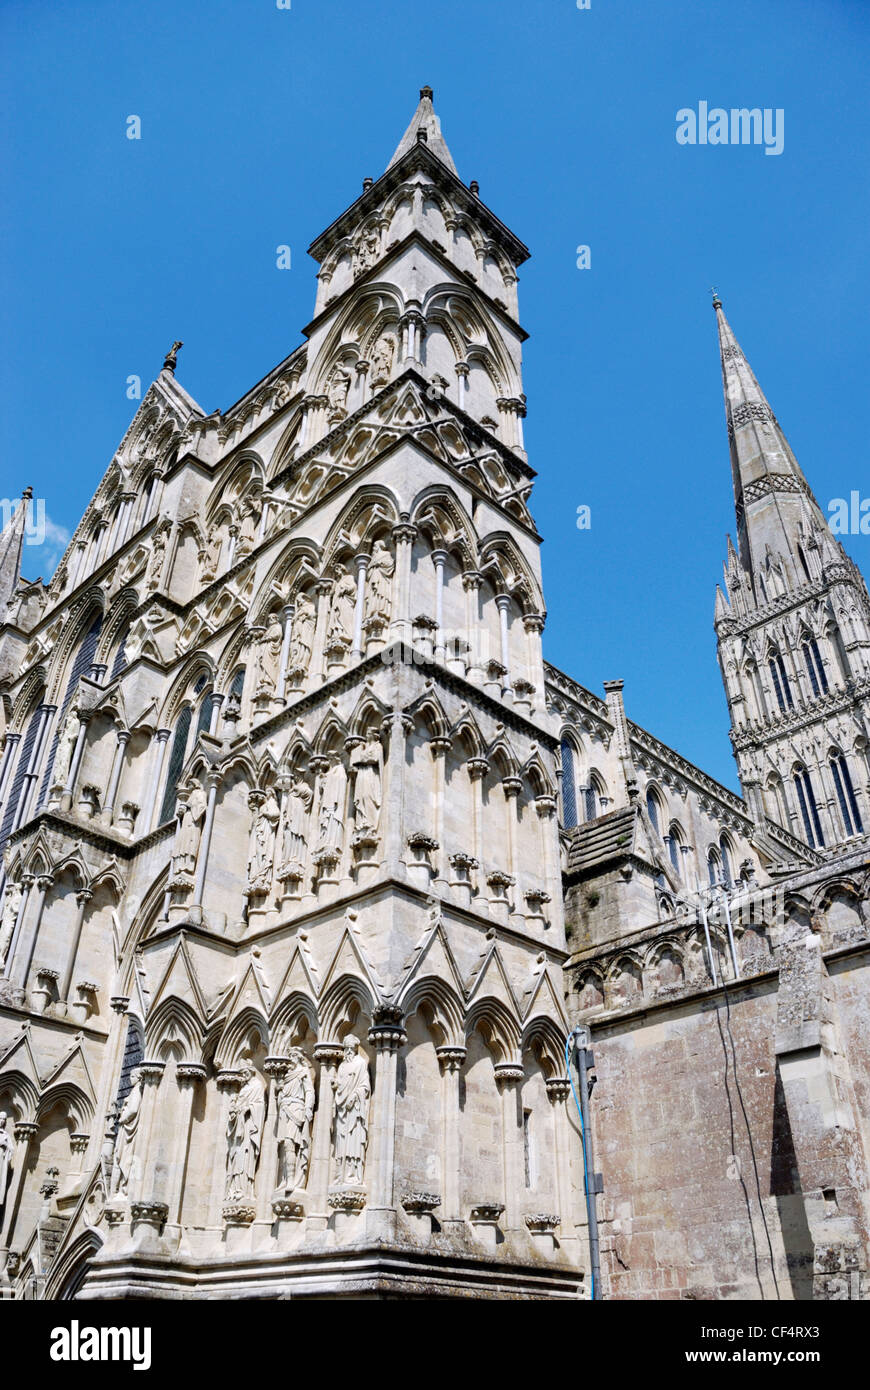 The ornate towers of Salisbury Cathedral, one of the finest medieval cathedrals in Britain. Stock Photo